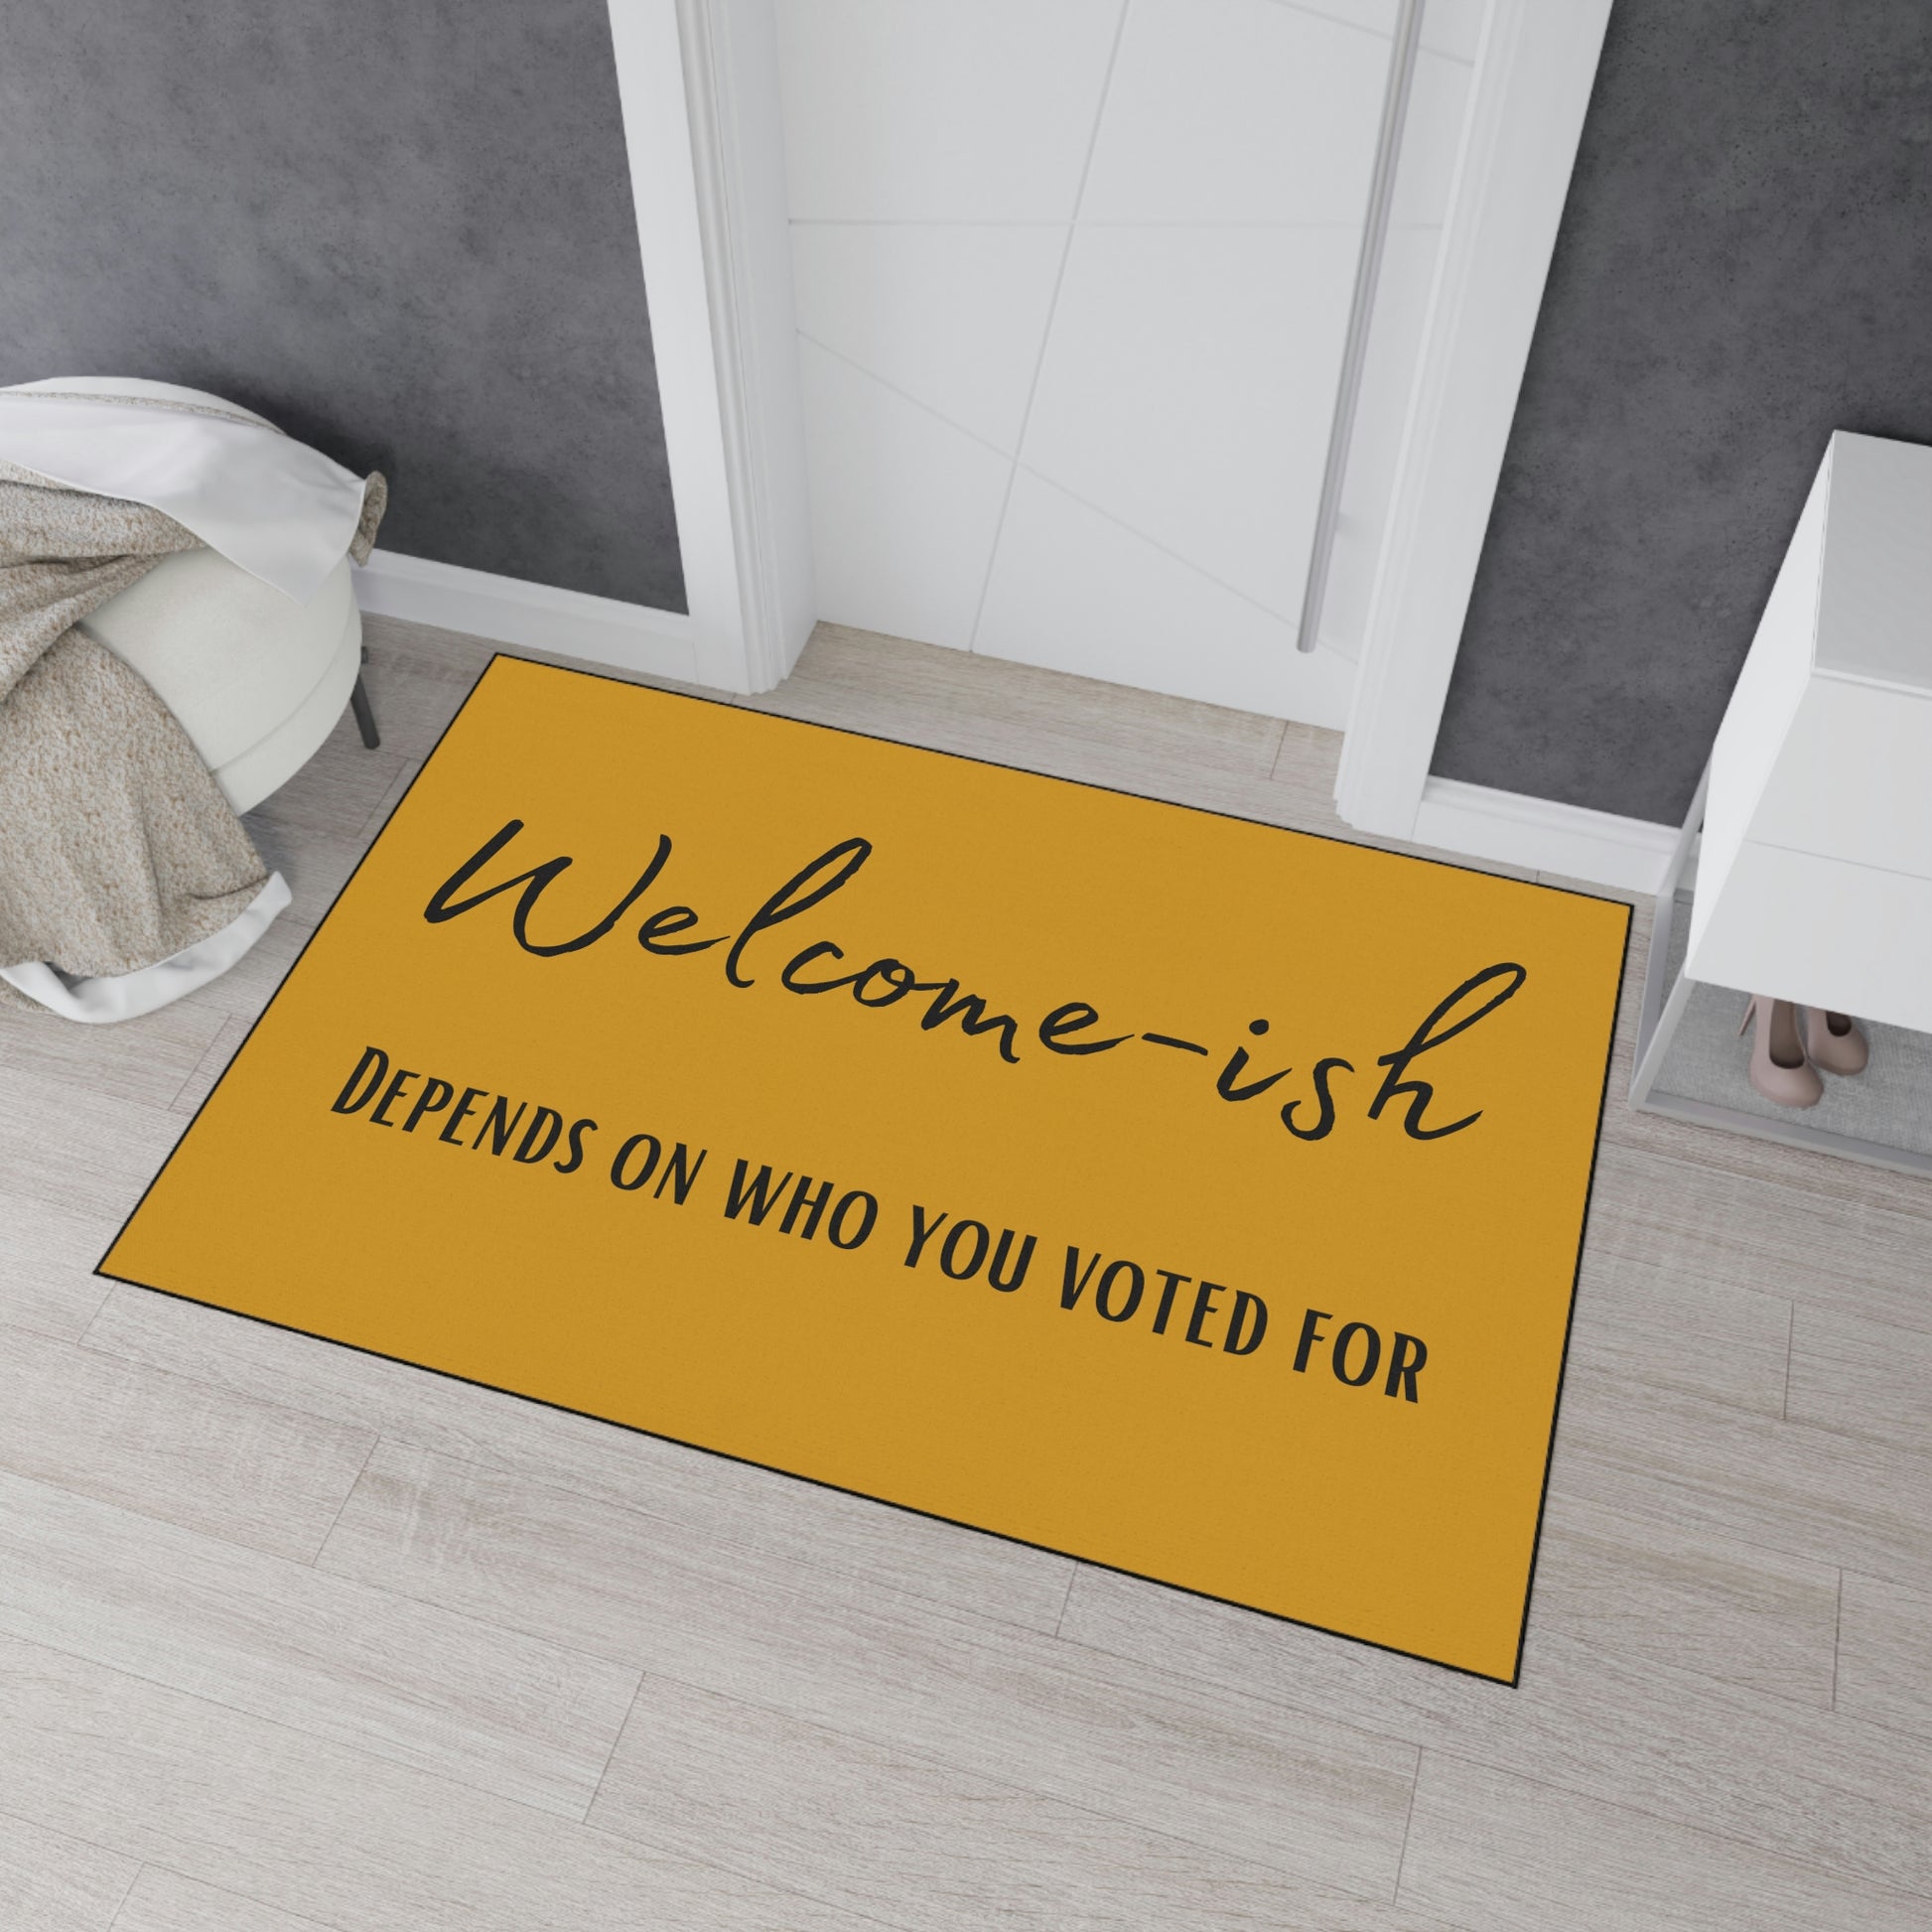 "Welcome-ish" Door Mat - Weave Got Gifts - Unique Gifts You Won’t Find Anywhere Else!